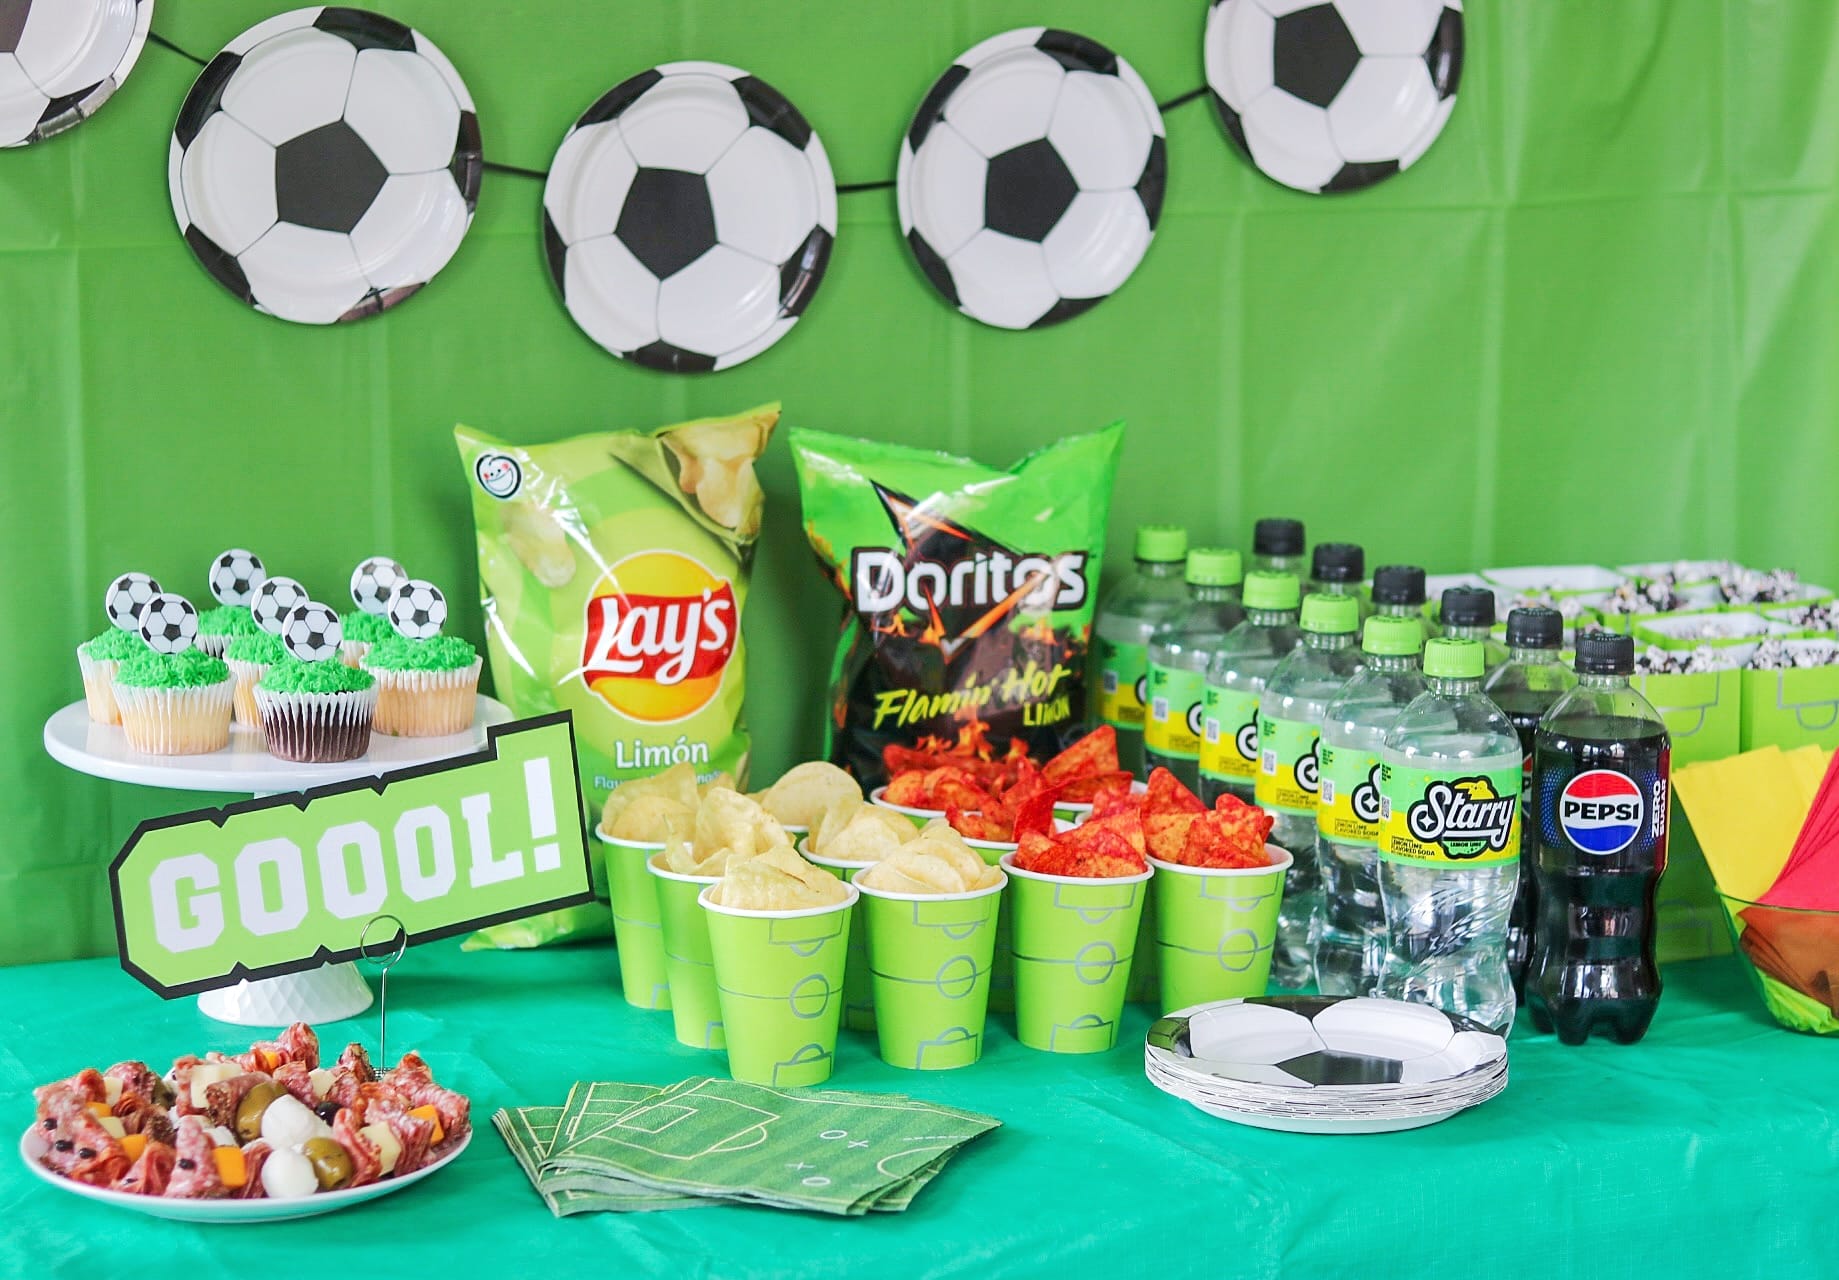 end of season soccer team party ideas with homemade soccer party decorations and cheap soccer party supplies